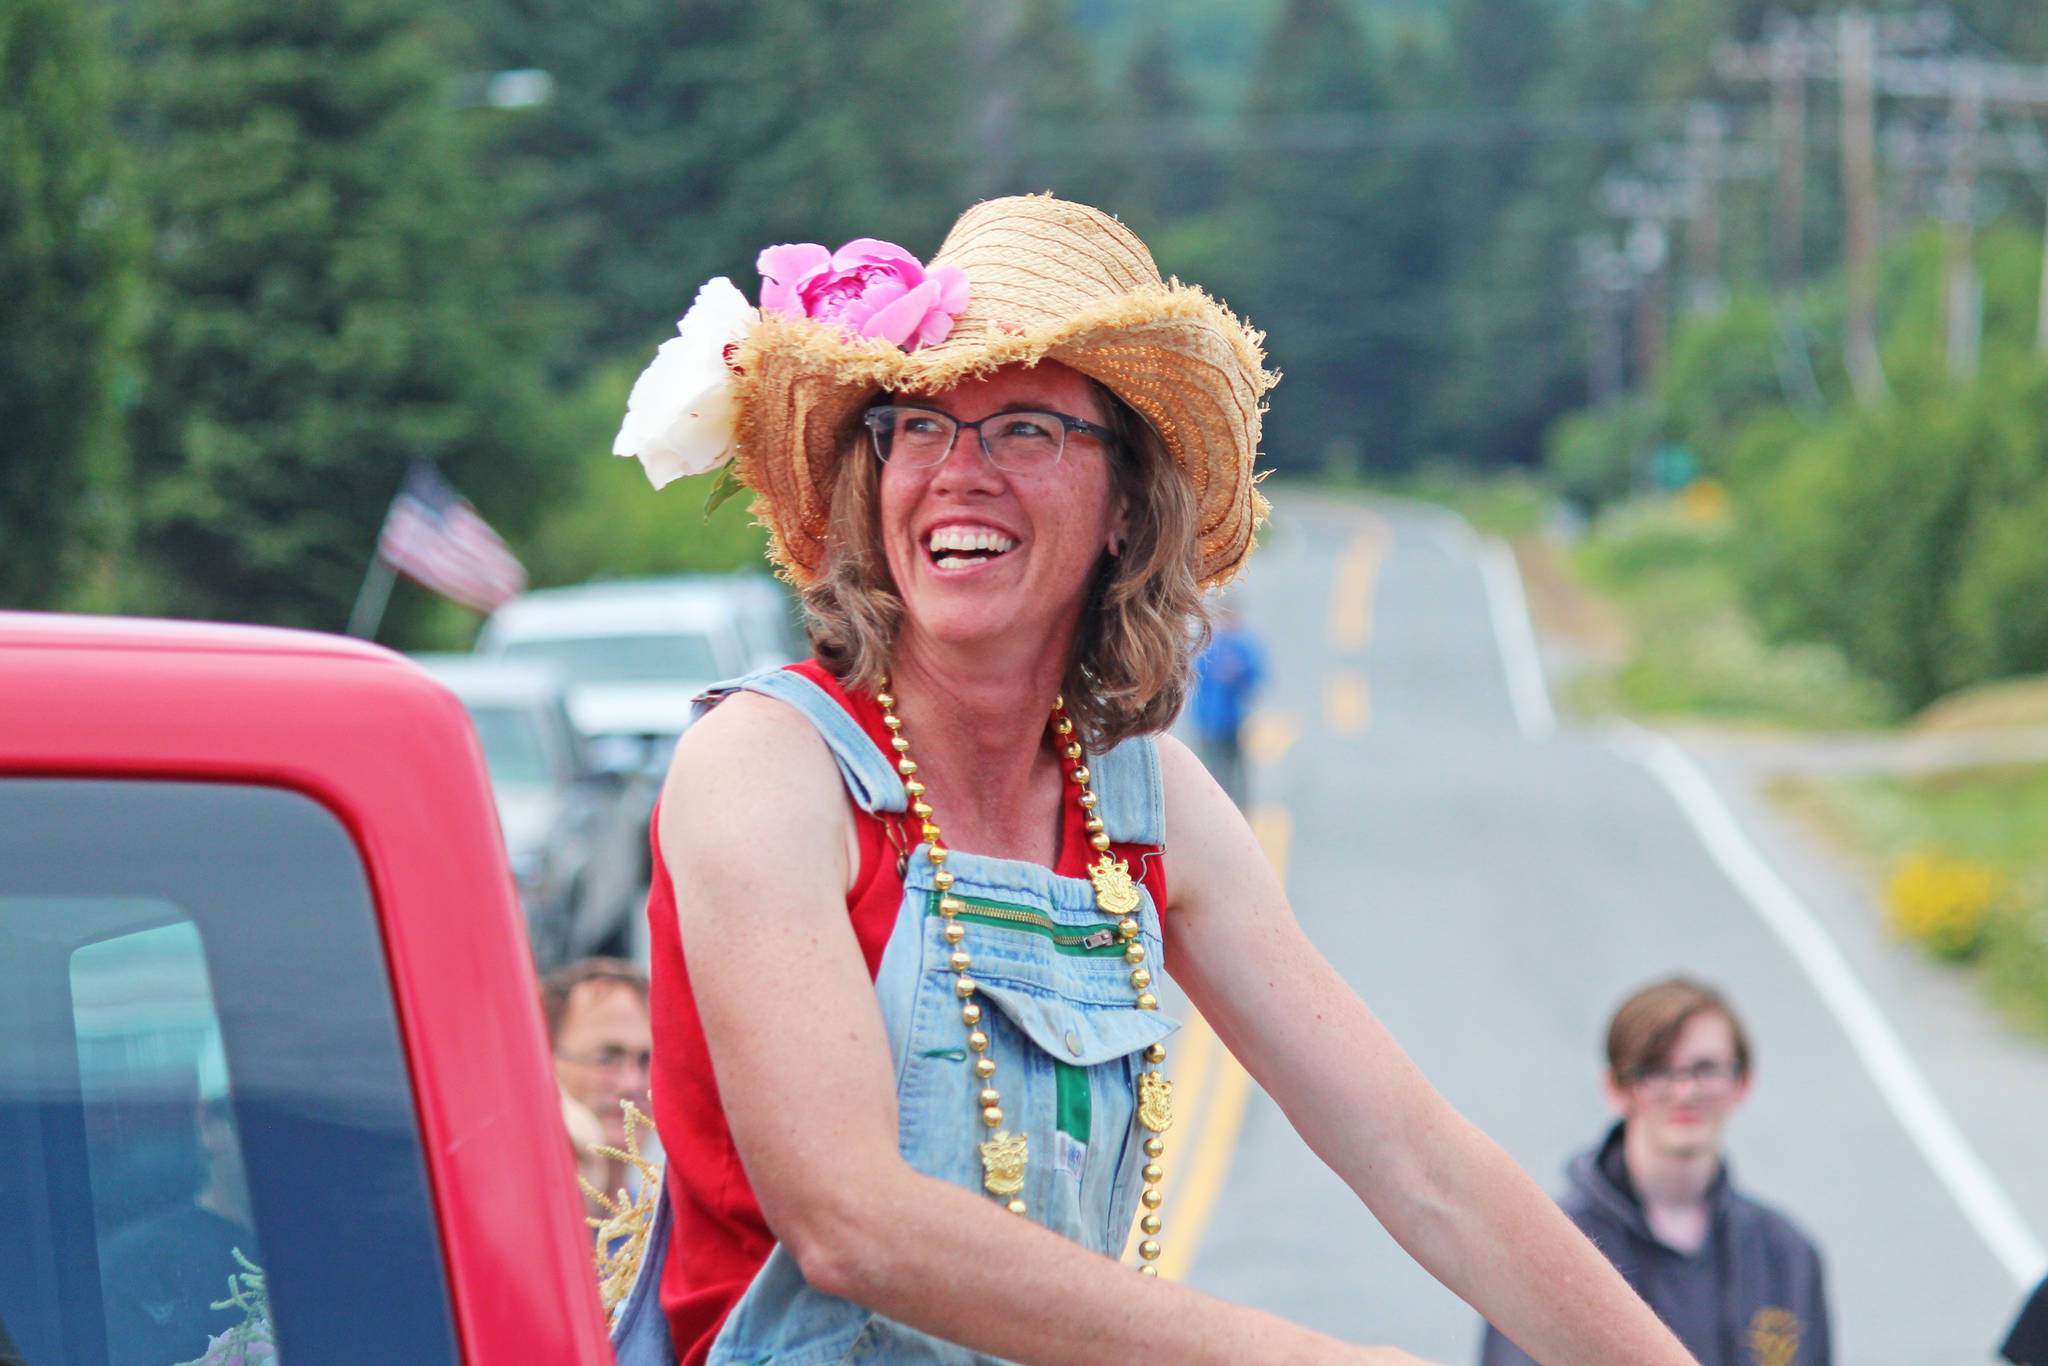 Kyra Wagner, the grand marshal for this year’s July Fourth parade hosted by the Homer Chamber of Commerce, smiles while riding along the parade route Thursday, July 4, 2019 on Pioneer Avenue in Homer, Alaska. (Photo by Megan Pacer/Homer News)